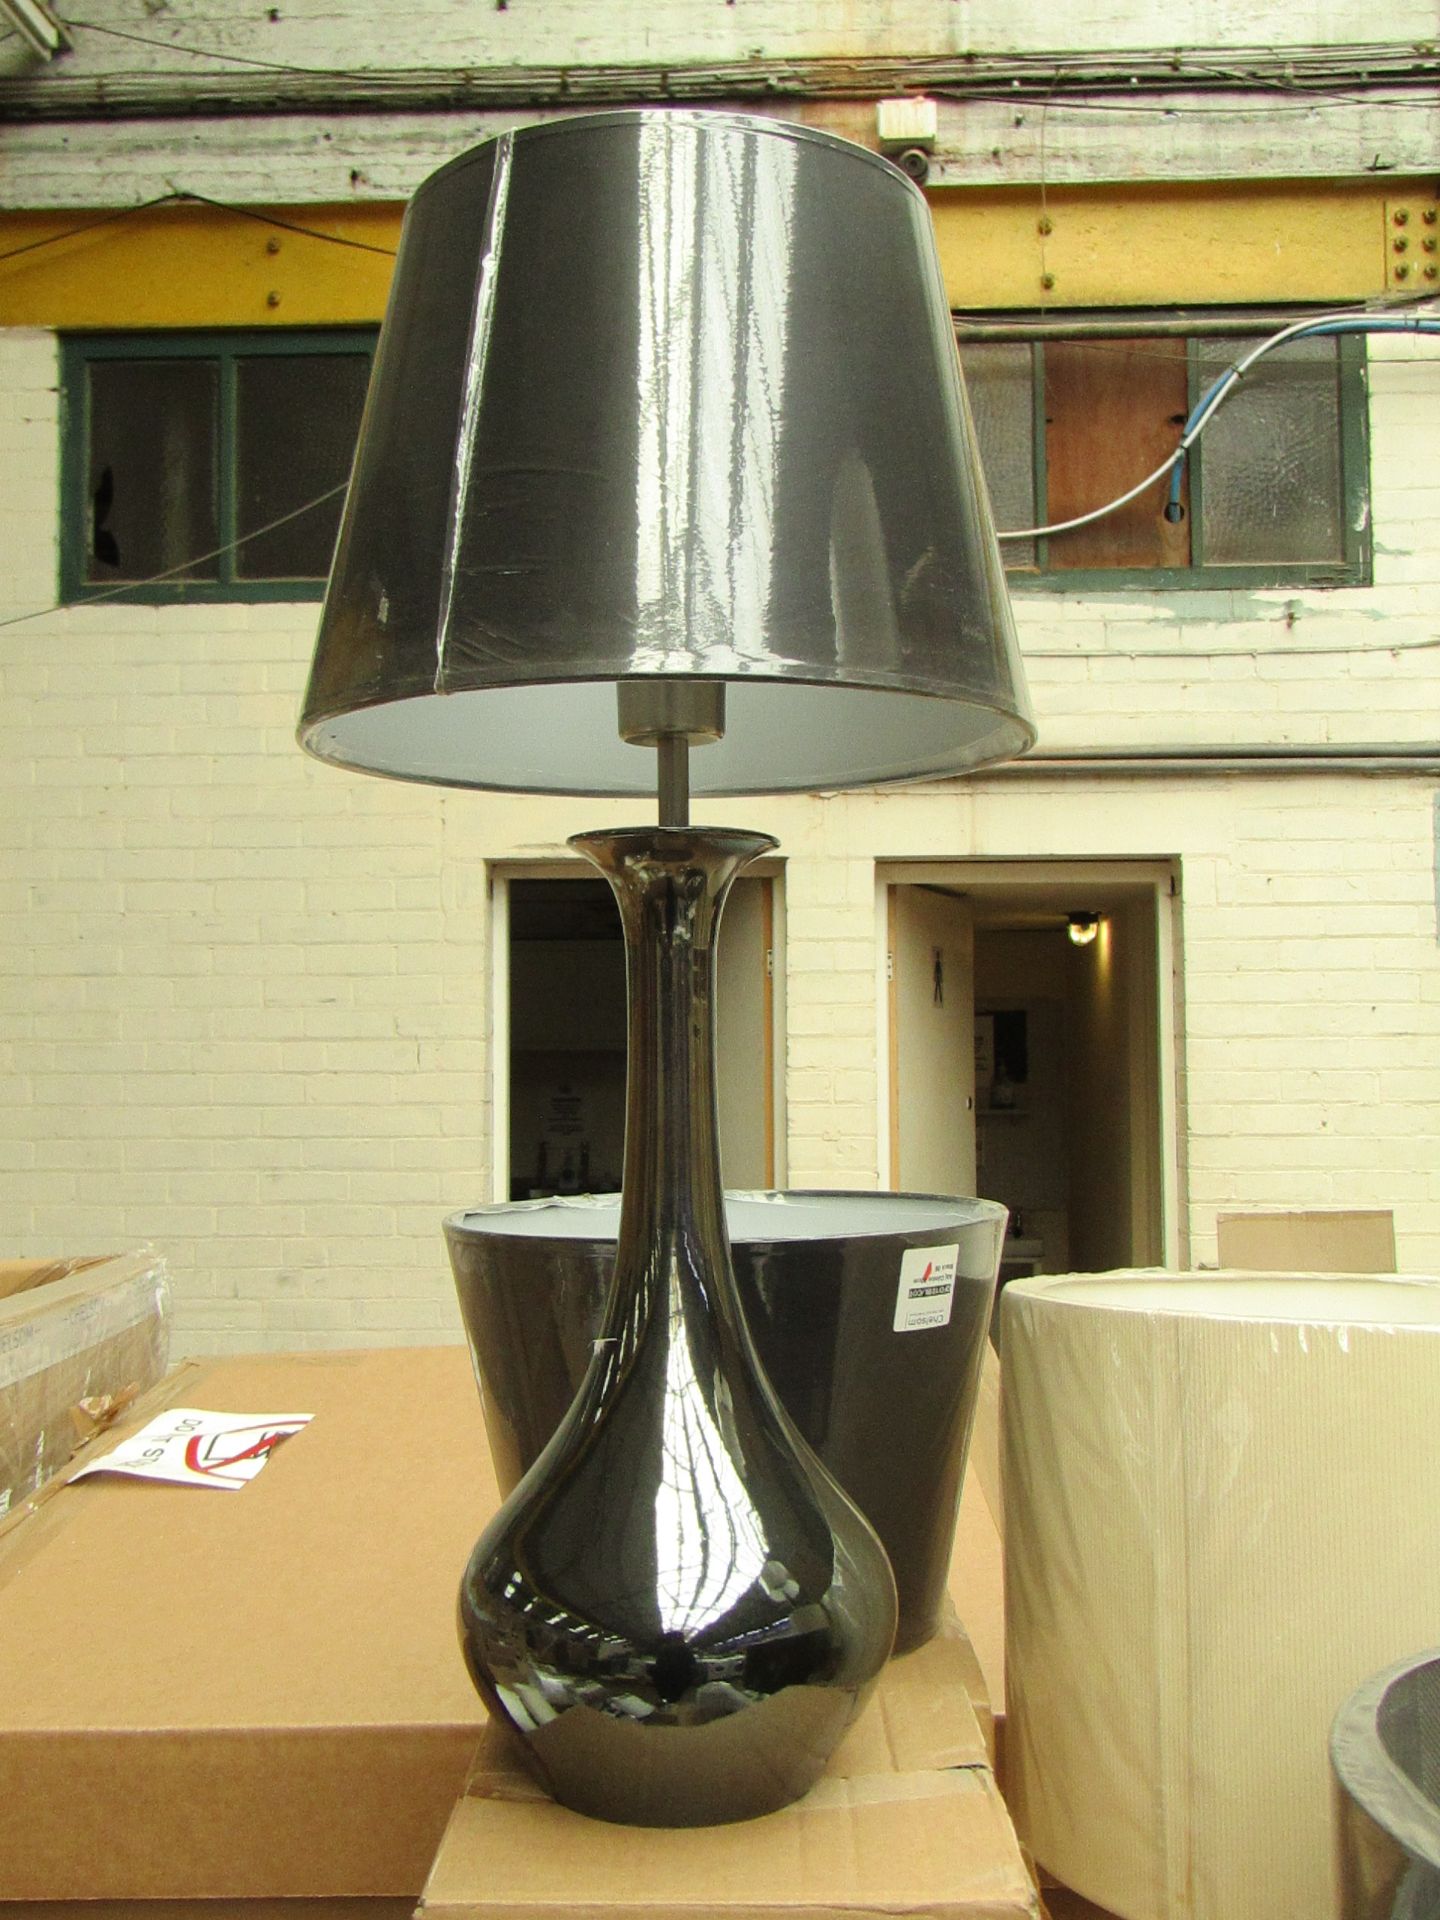 Chelsom CA/11/T1 lamp base with Shade